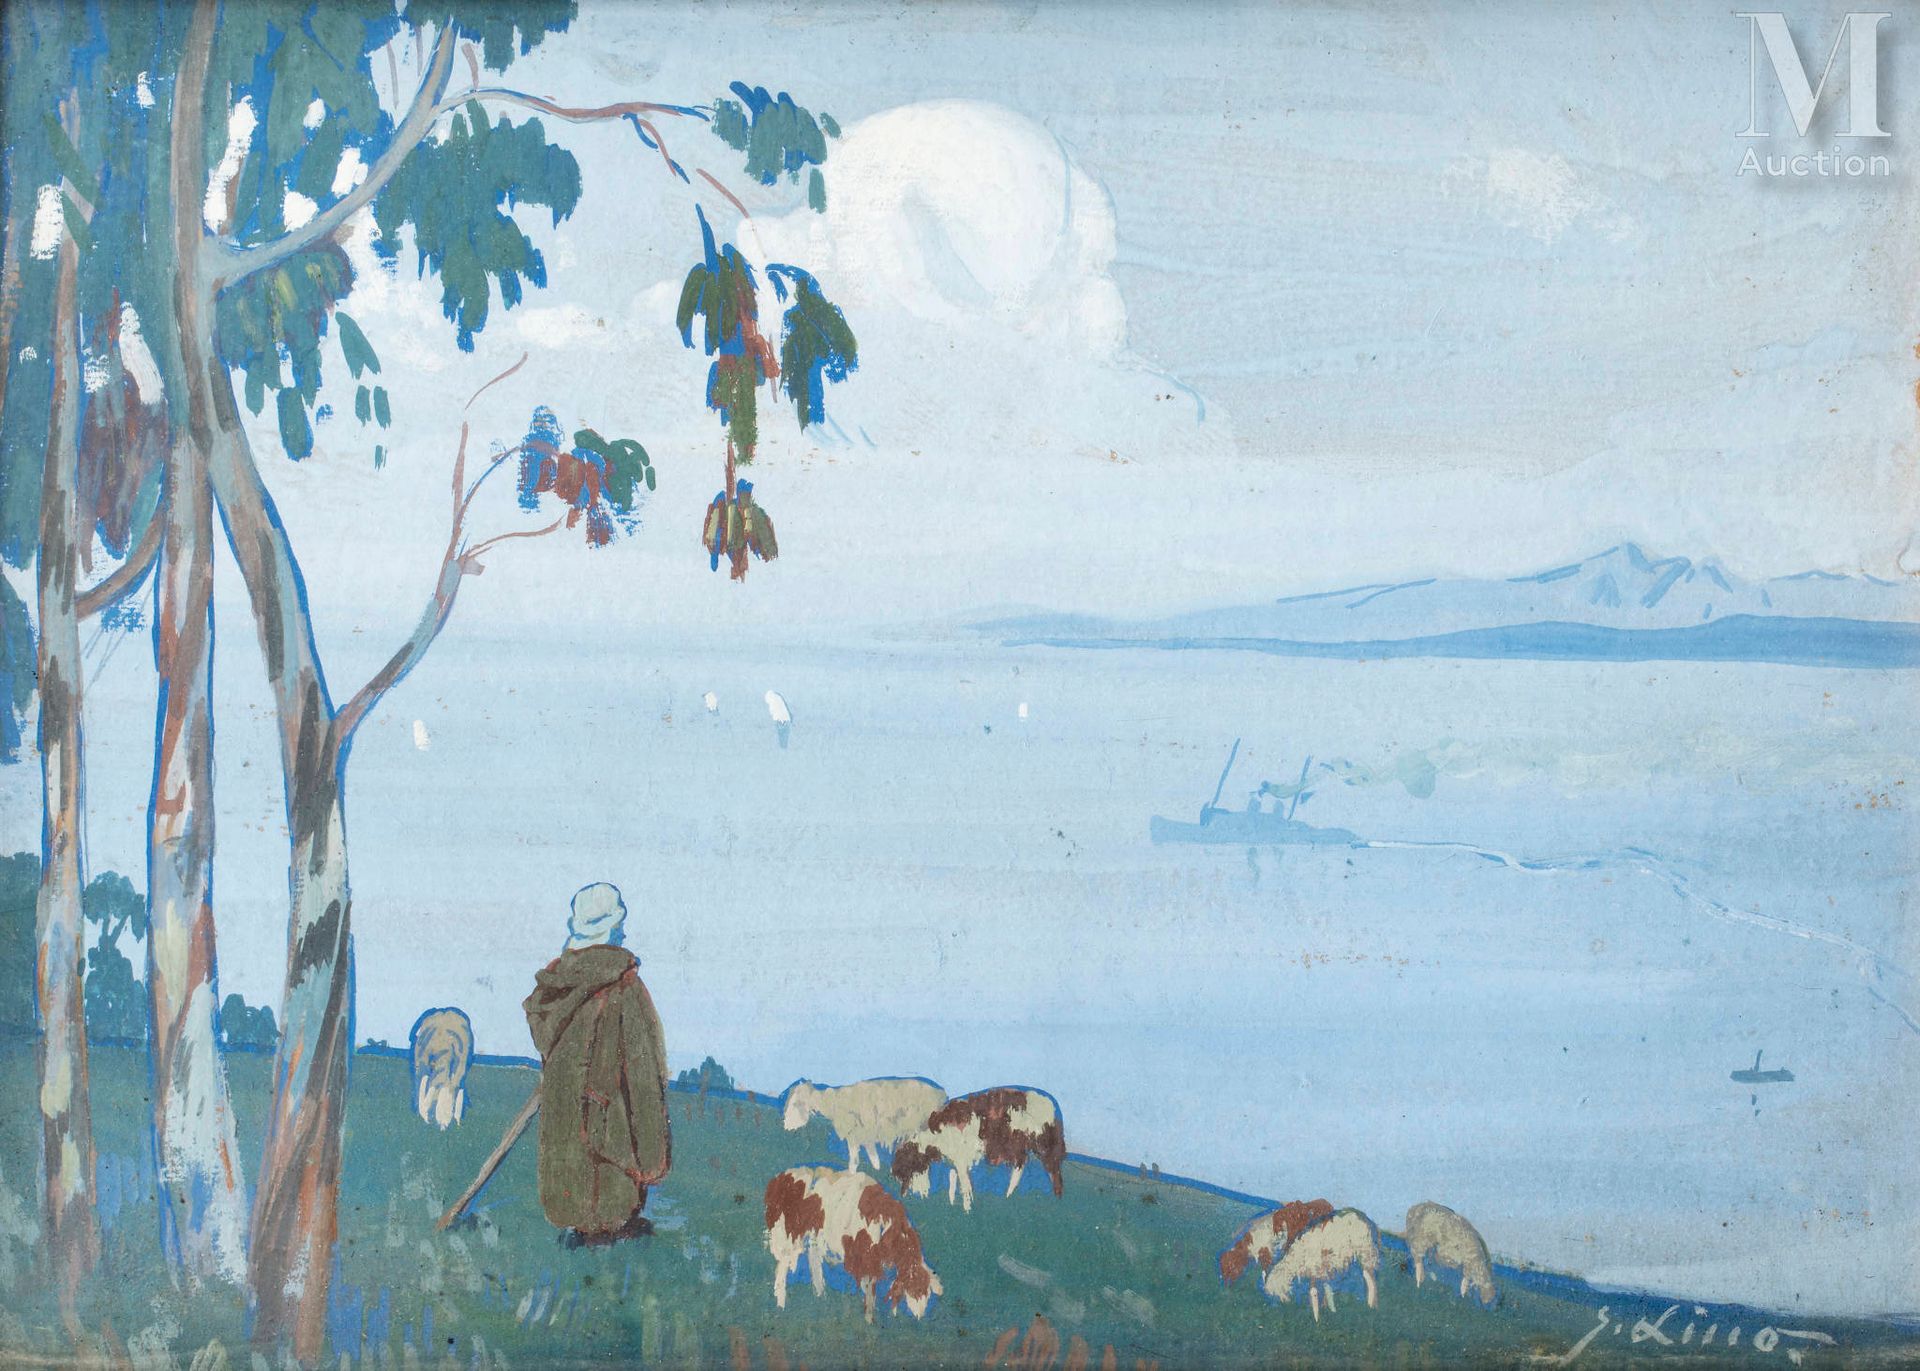 Gustave LINO (Mulhouse 1893 - Alger 1961) Shepherds in front of the bay

Gustave&hellip;